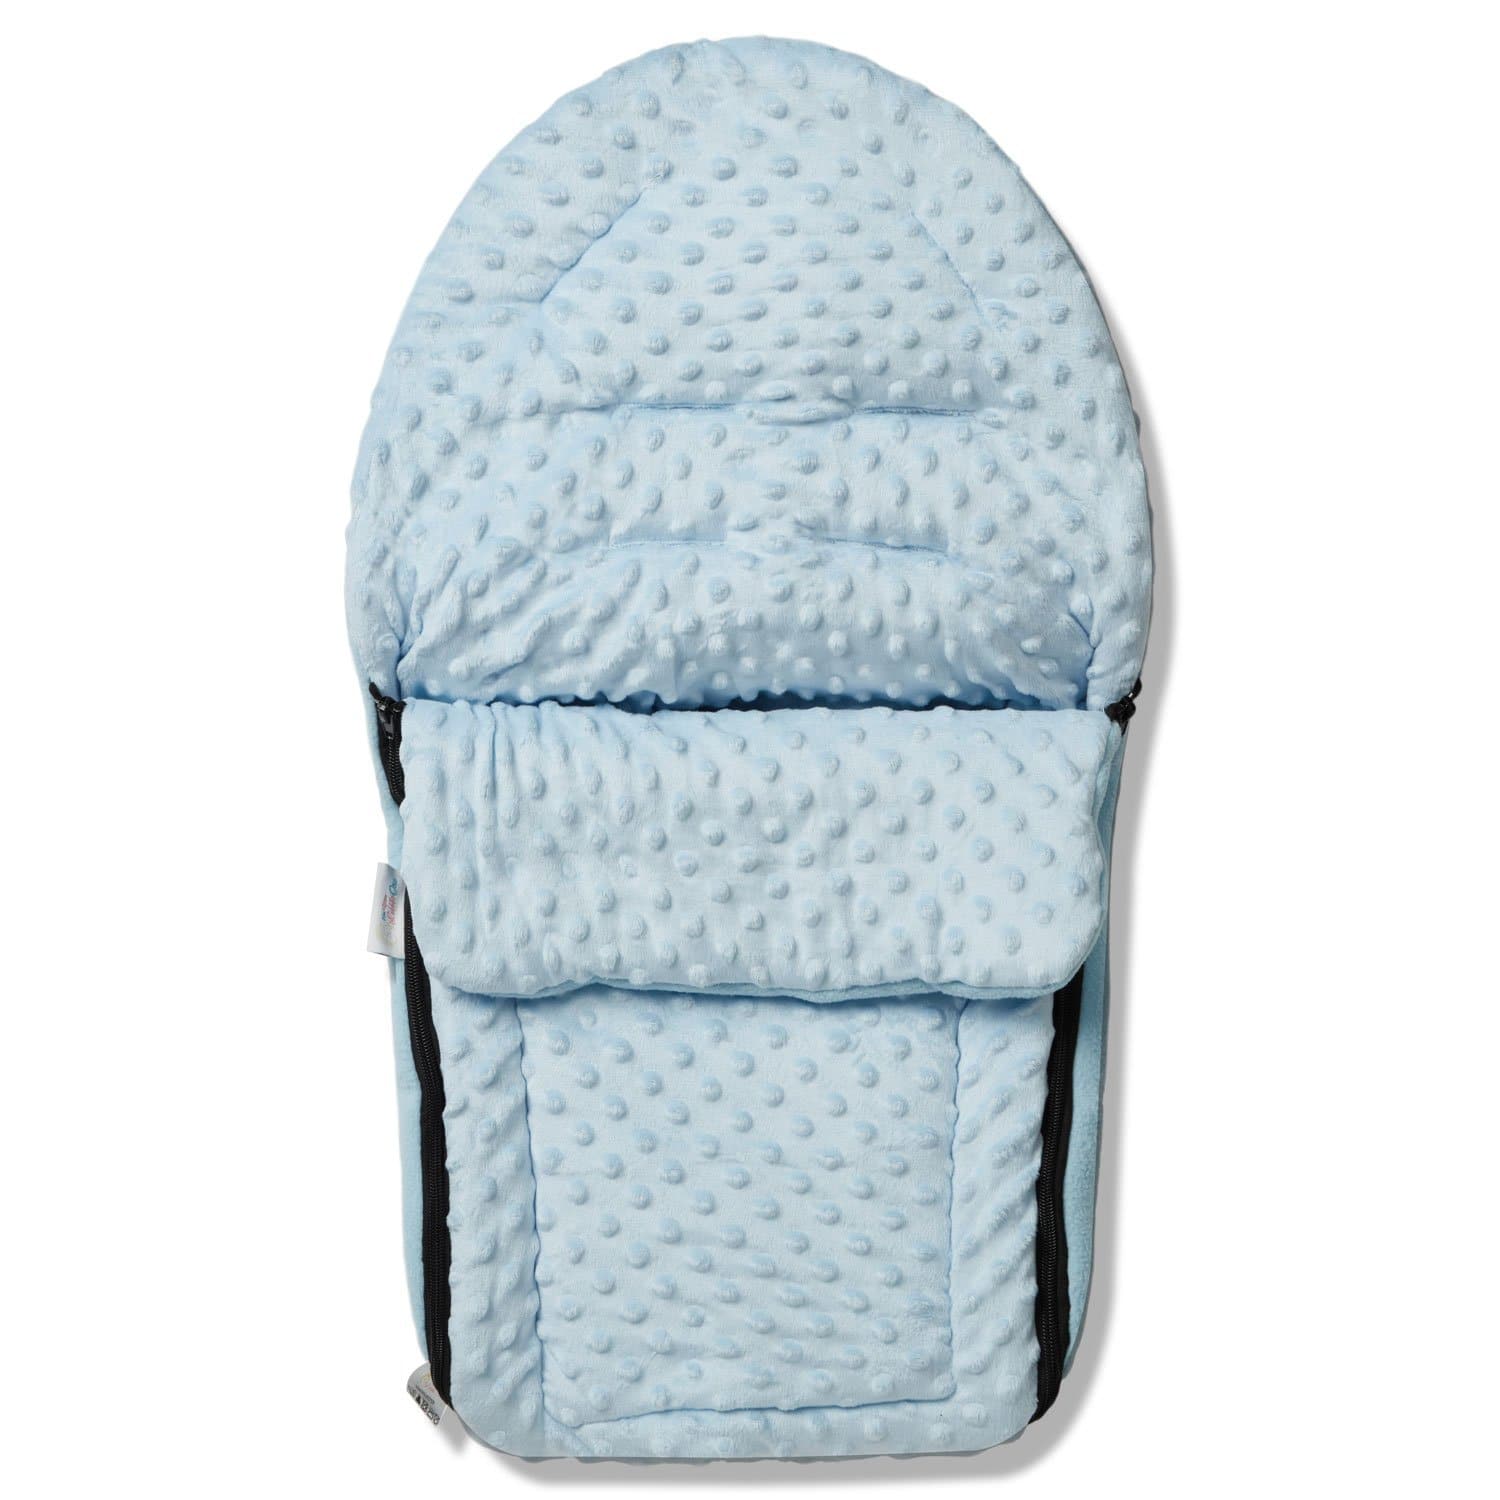 Dimple Car Seat Footmuff / Cosy Toes Compatible with Babylo - Blue / Fits All Models | For Your Little One